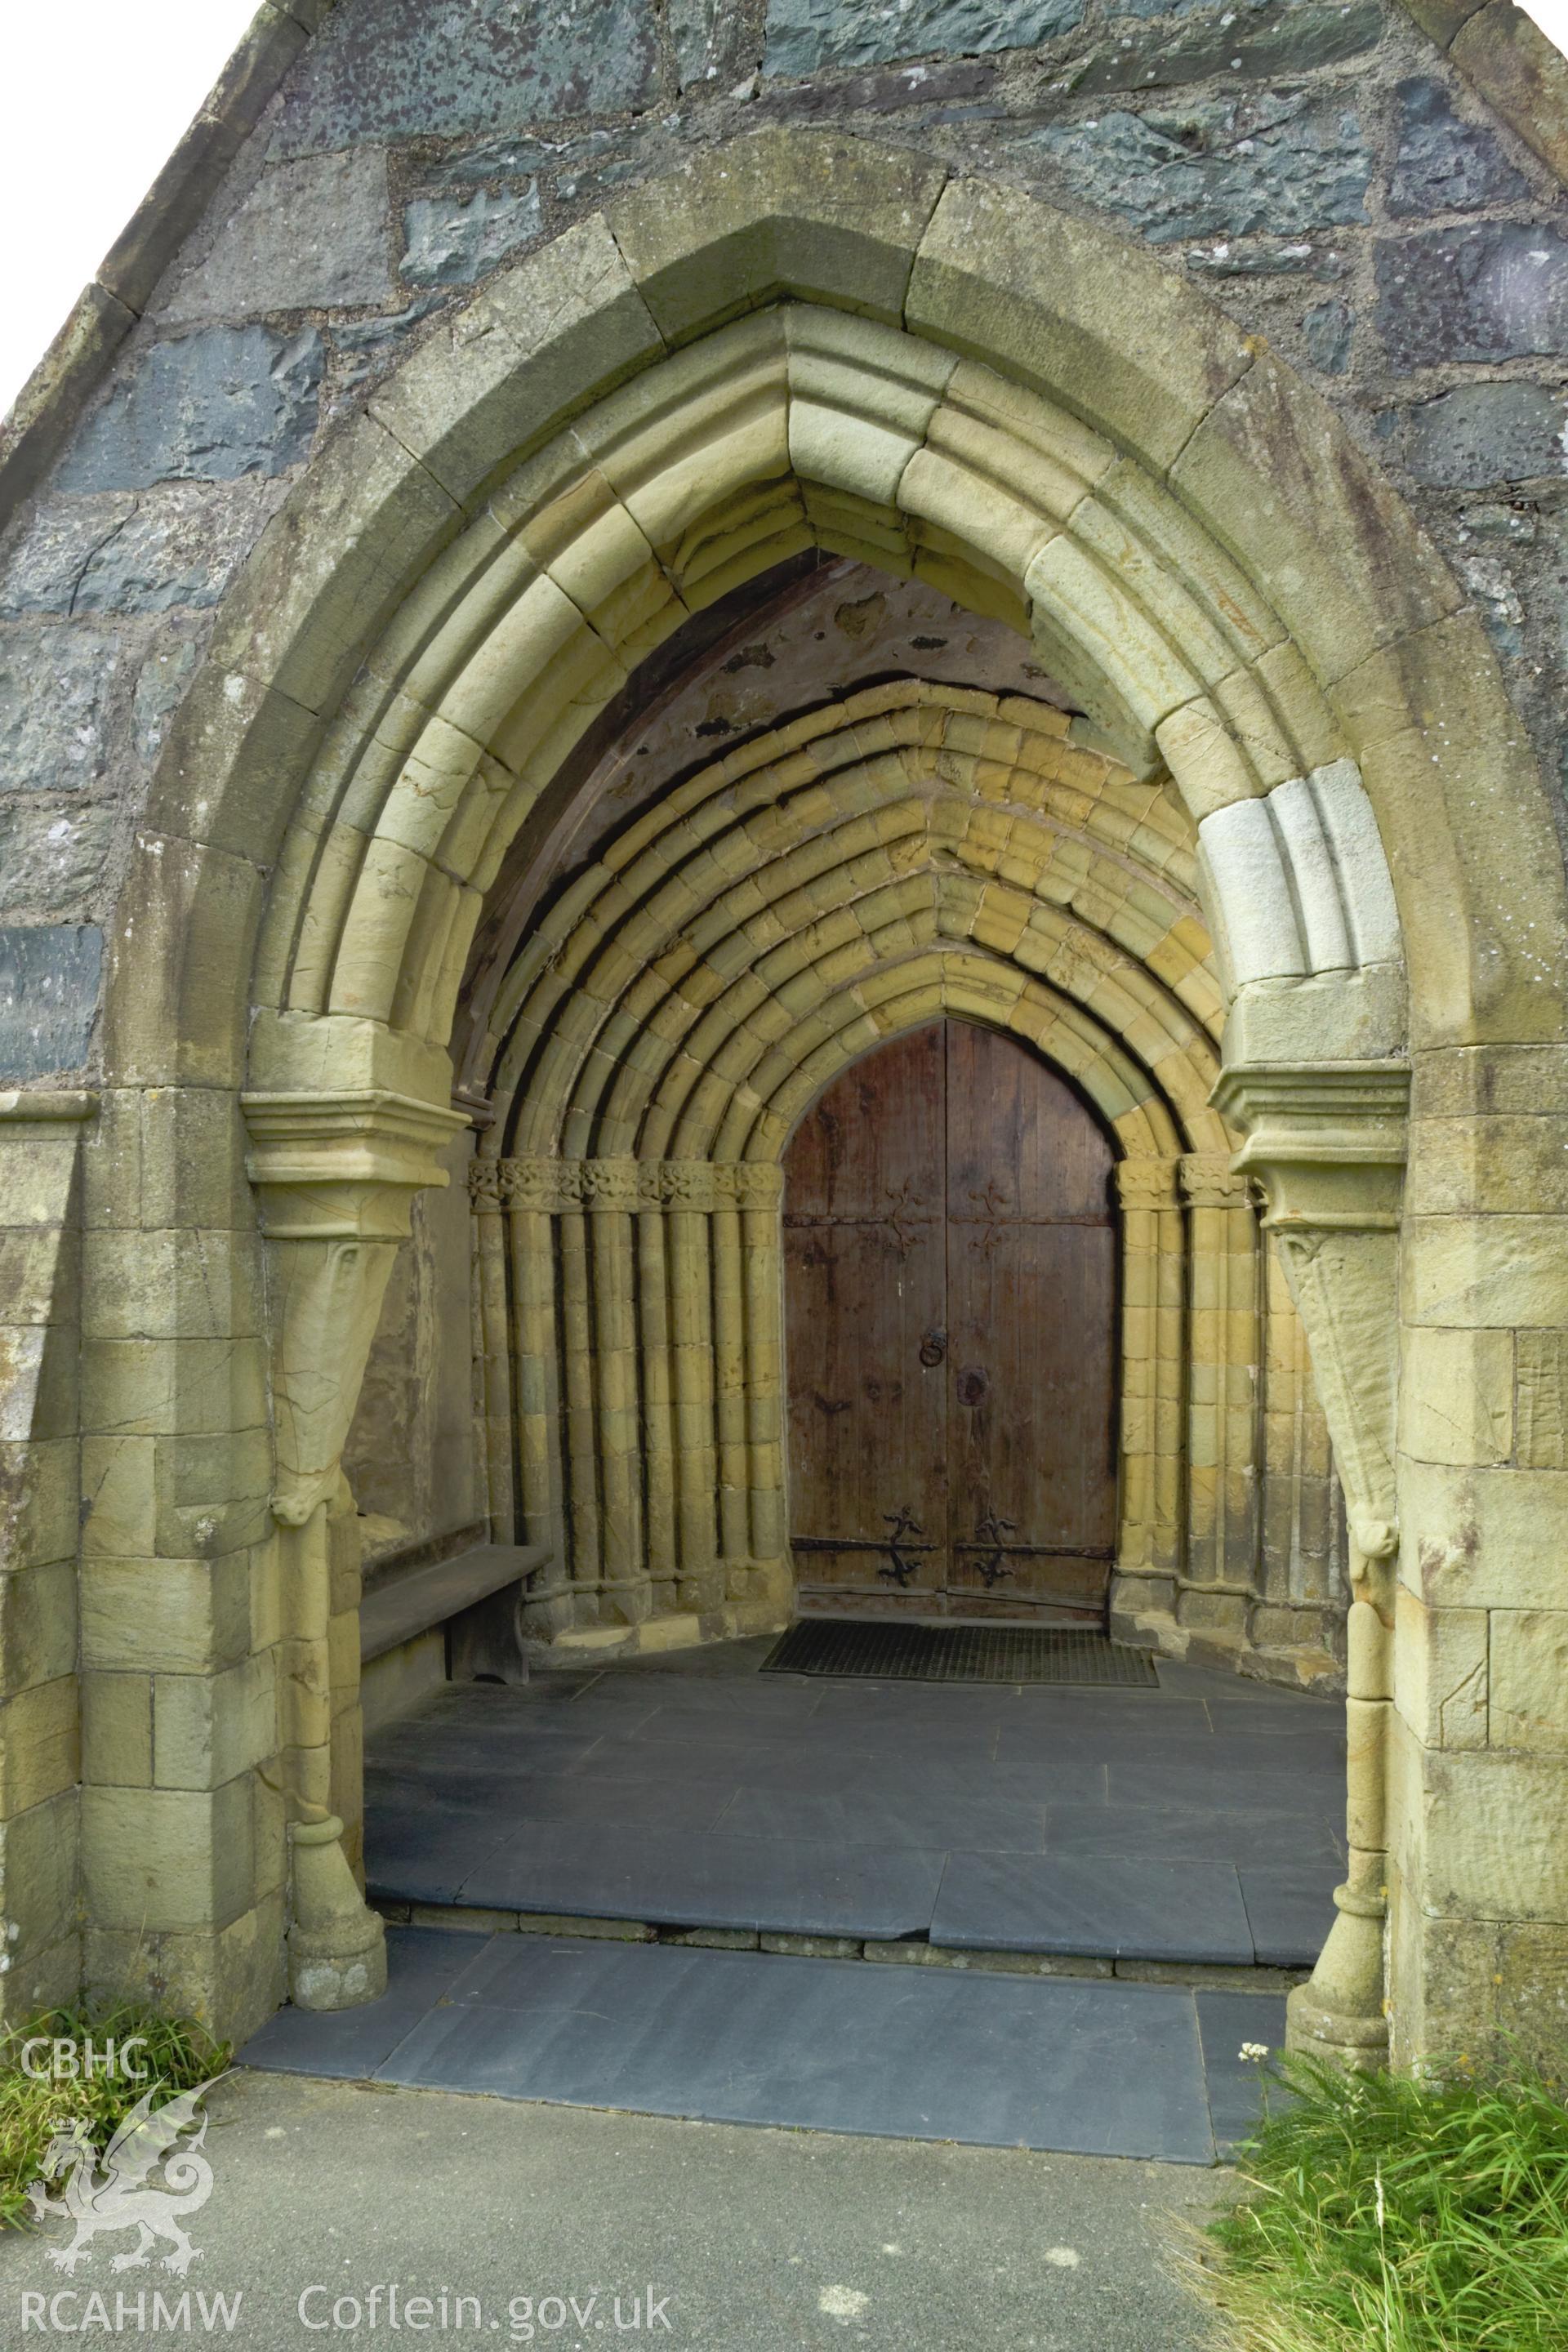 Entrance porch with early doorway.